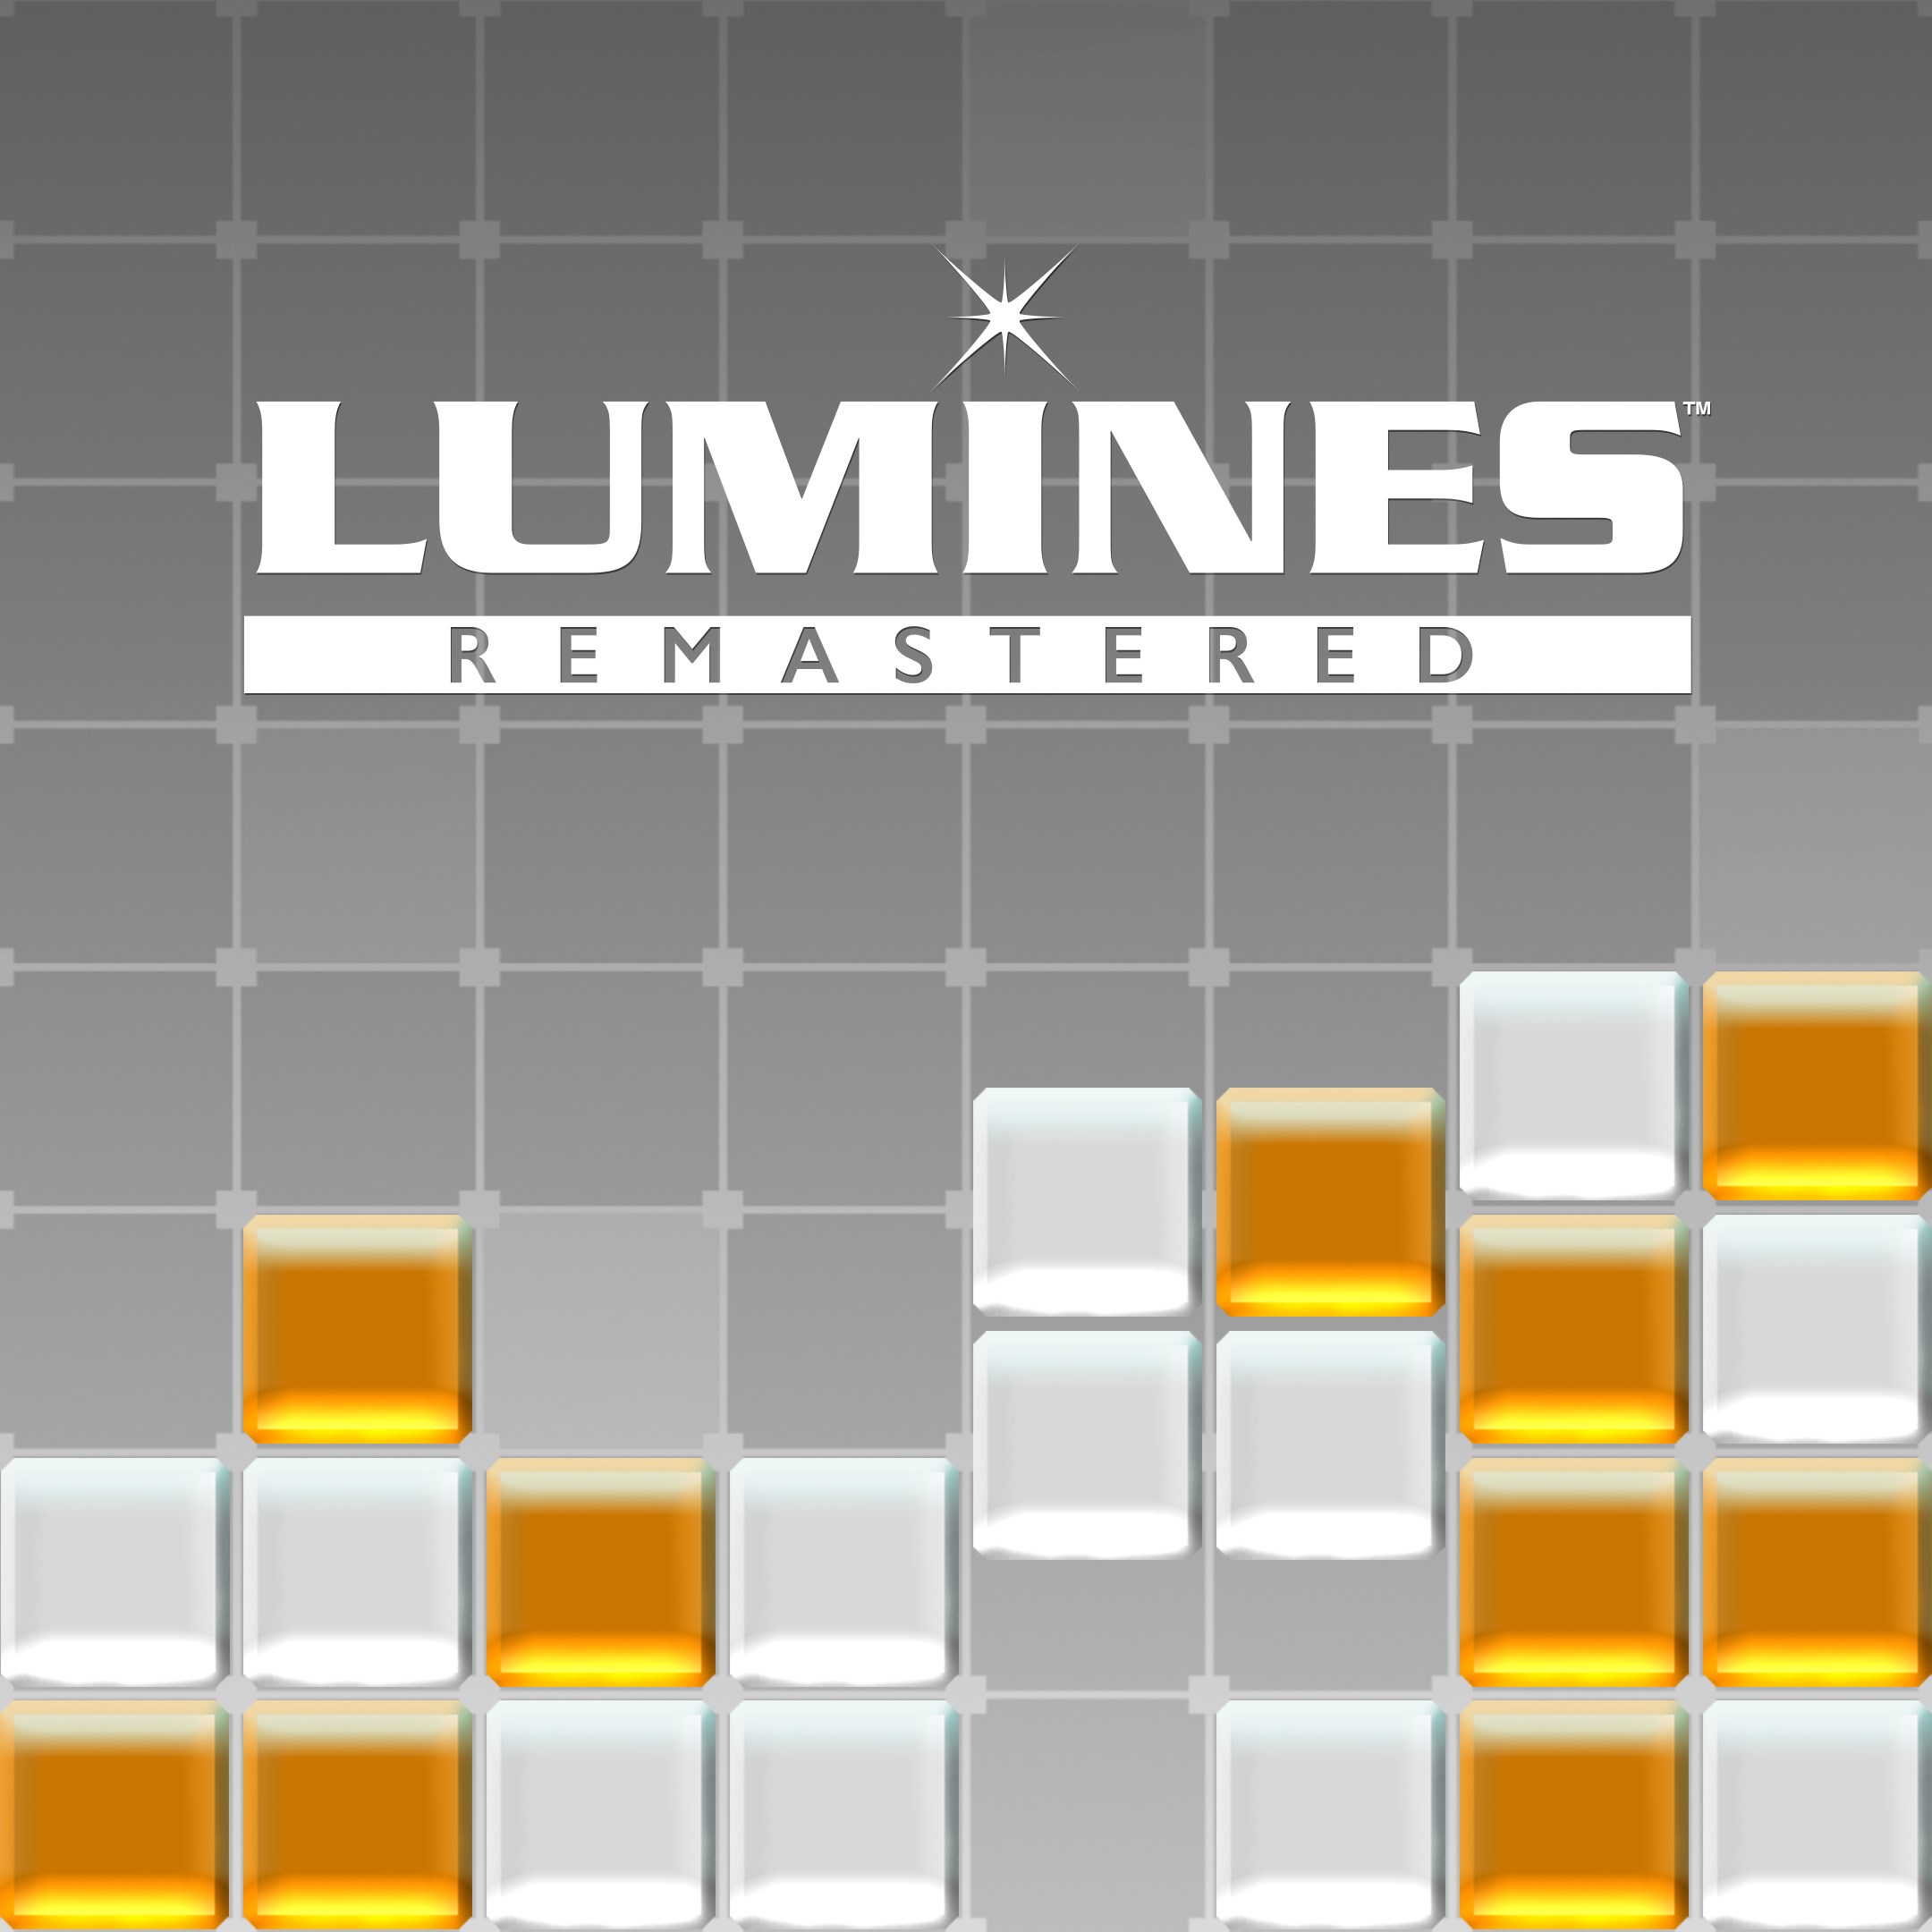 LUMINES REMASTERED technical specifications for computer